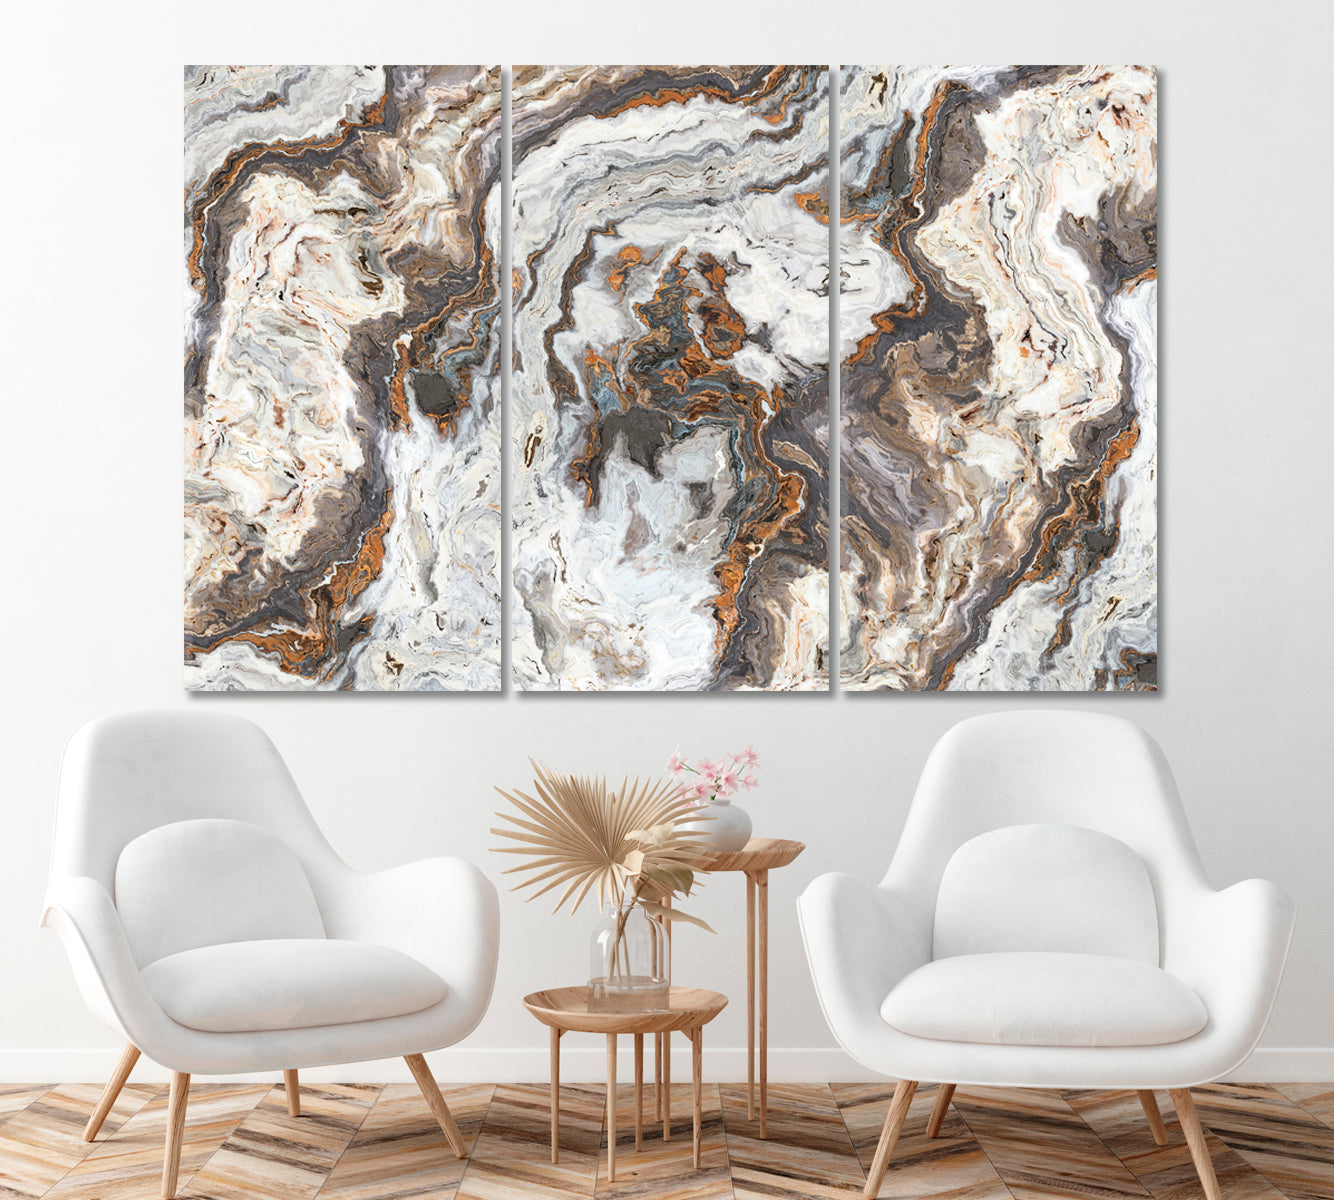 Natural Marble with Curly Grey and Gold Veins Canvas Print ArtLexy 3 Panels 36"x24" inches 